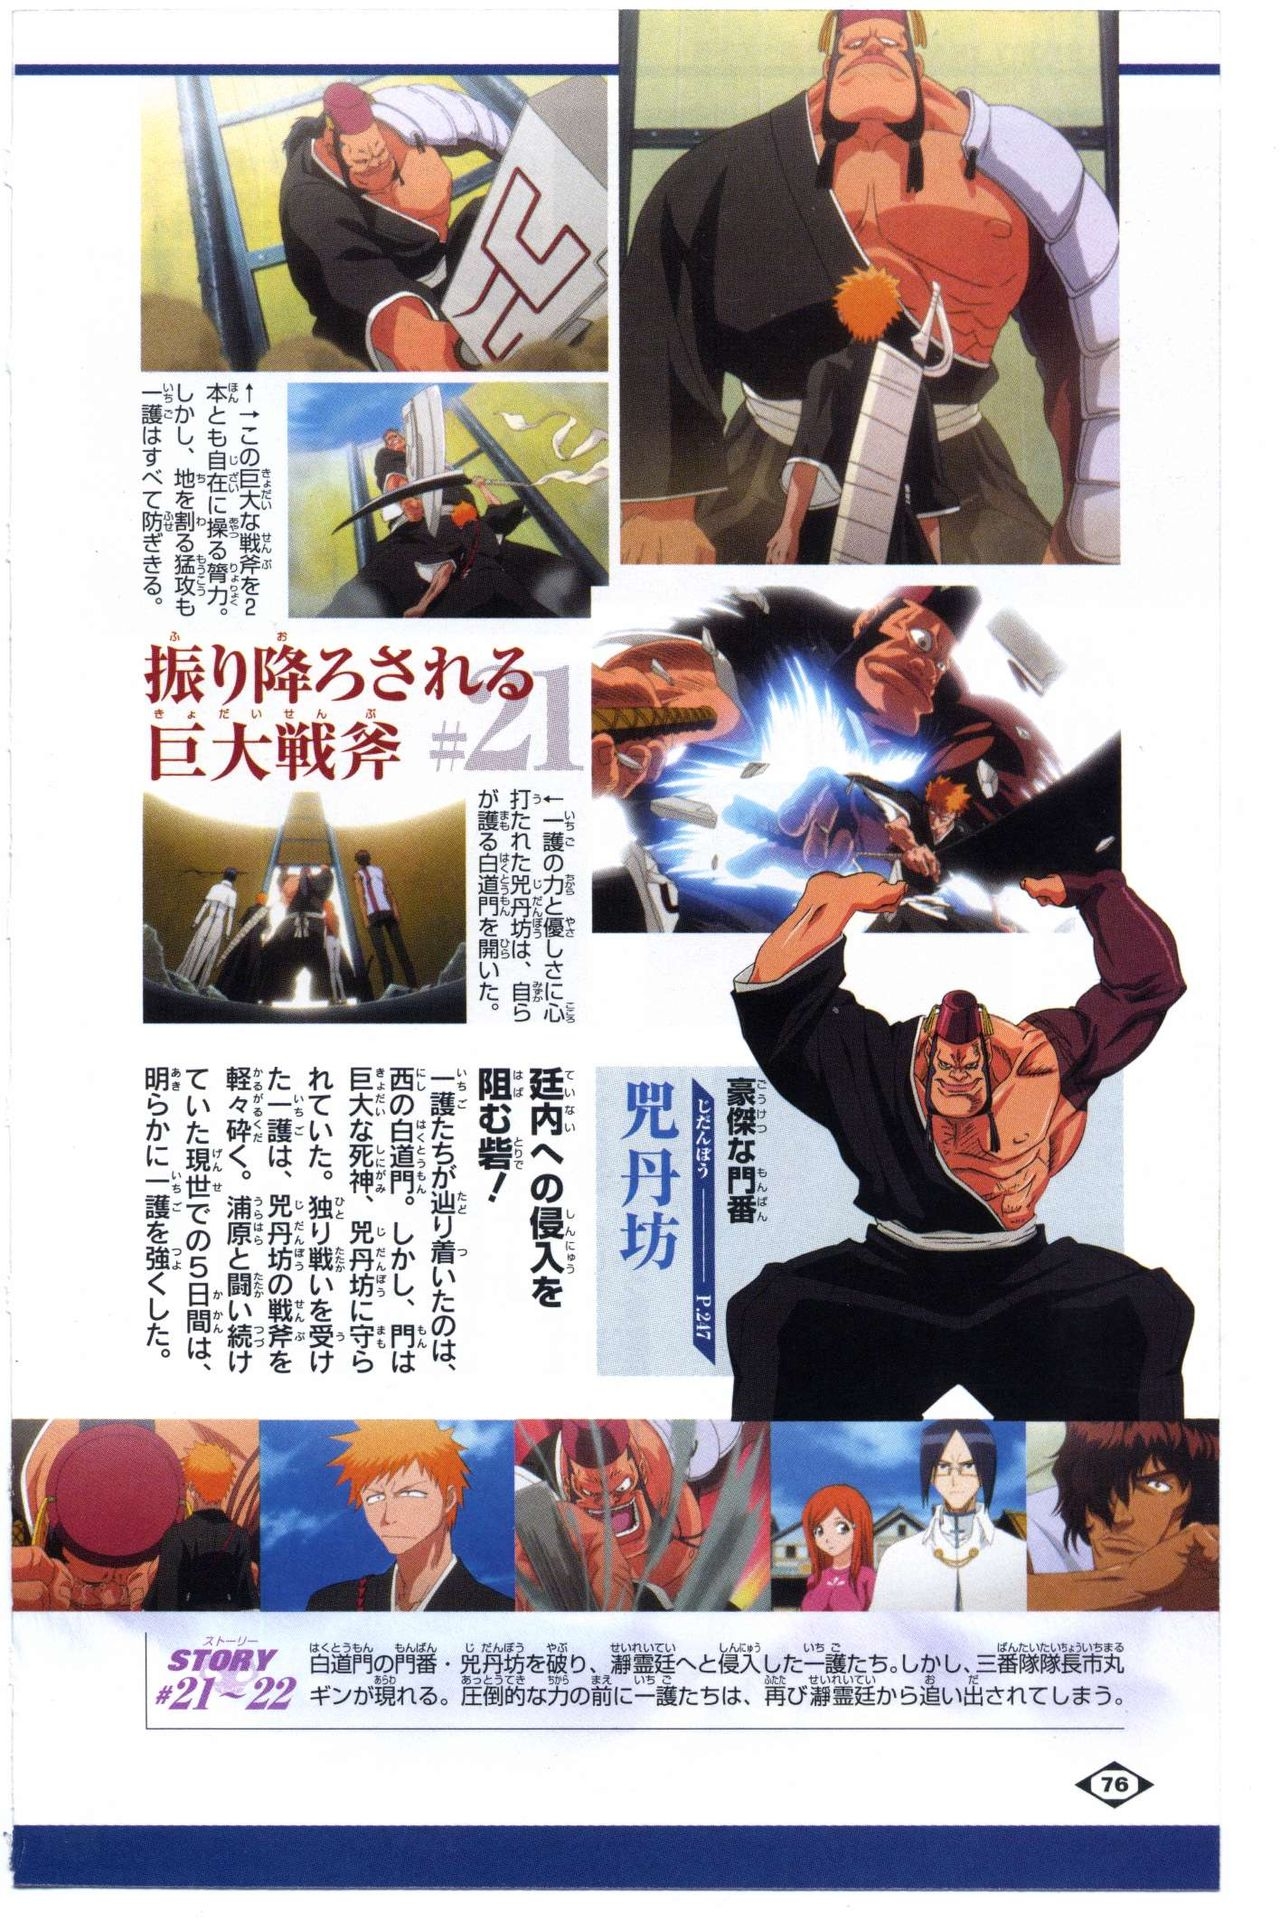 Bleach: Official Animation Book VIBEs 76